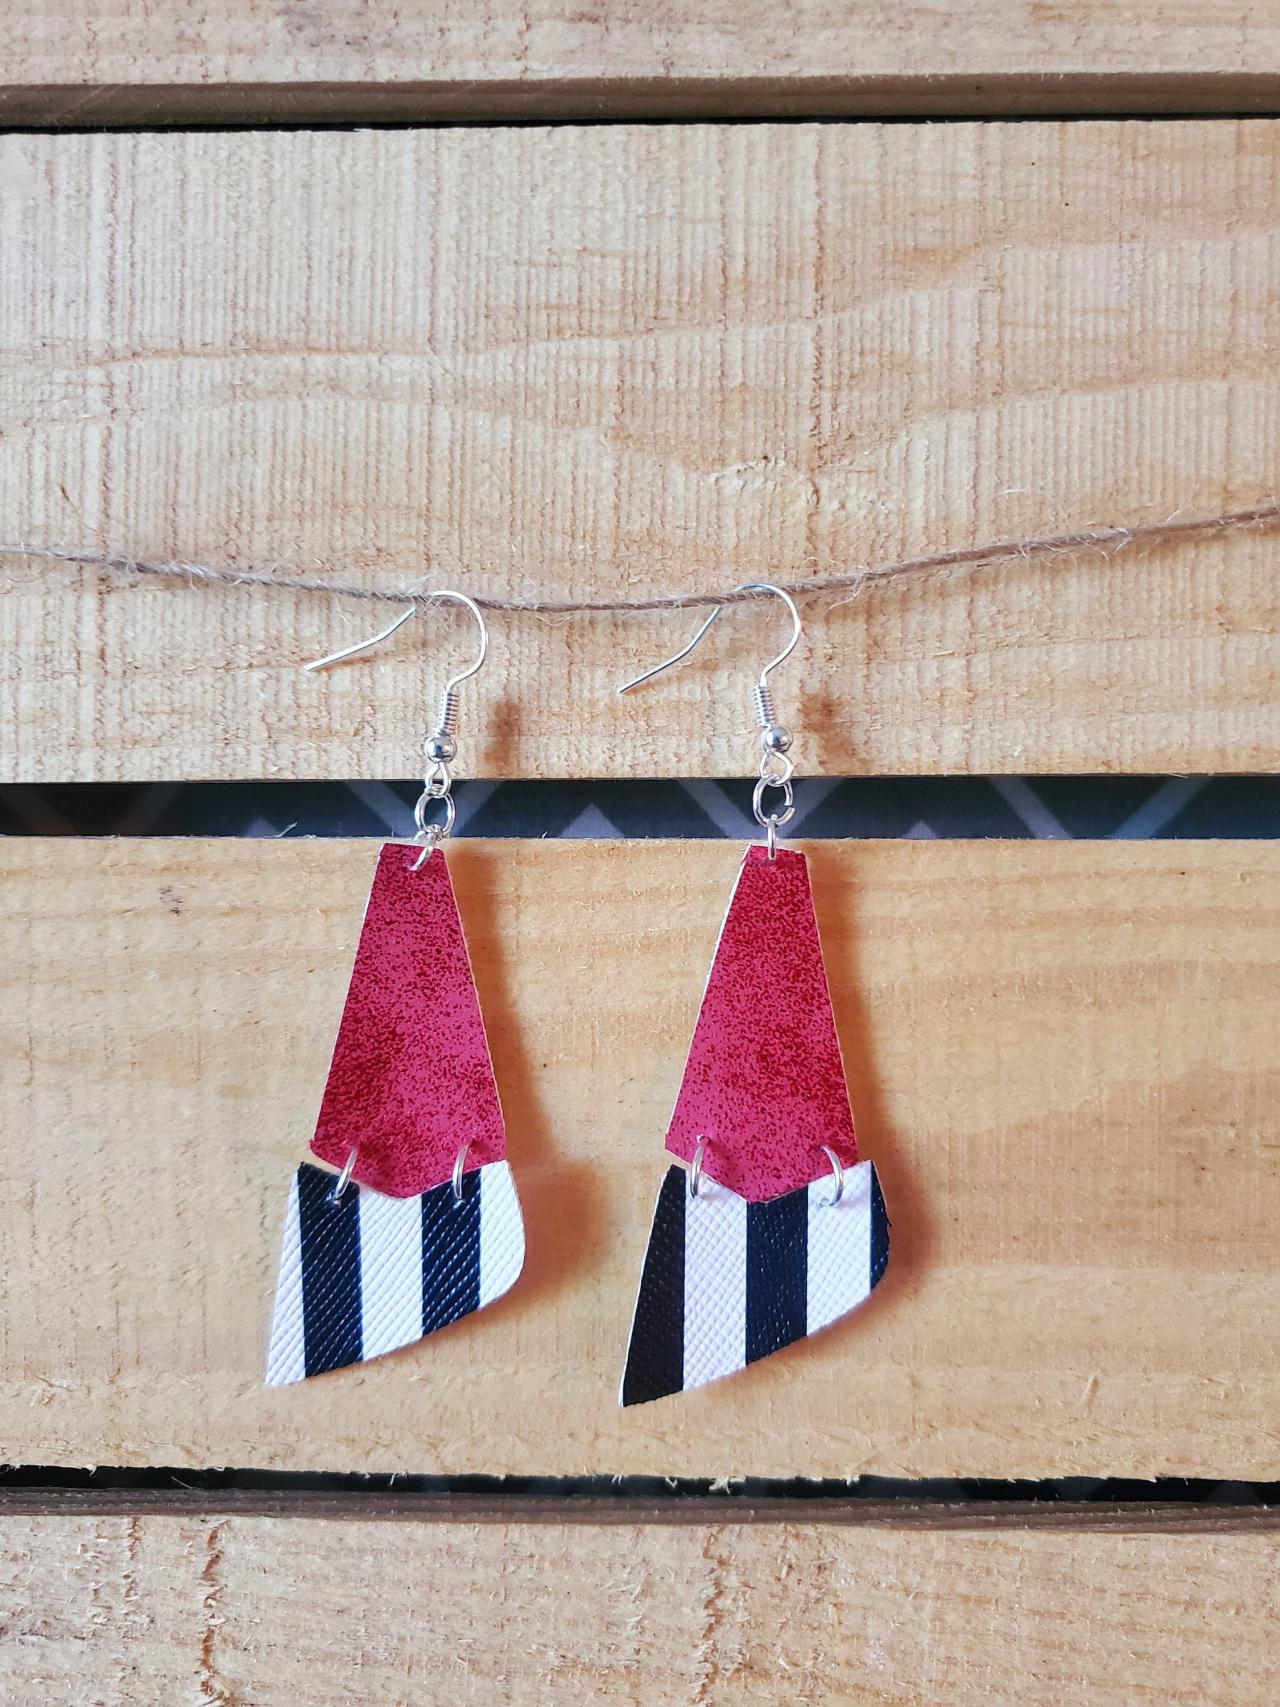 Metallic Red And Black Striped Leather Earrings, Split Leather Earrings, Hinged Leather Jewelry, Womans Gift, Boho Chic Leather Earrings